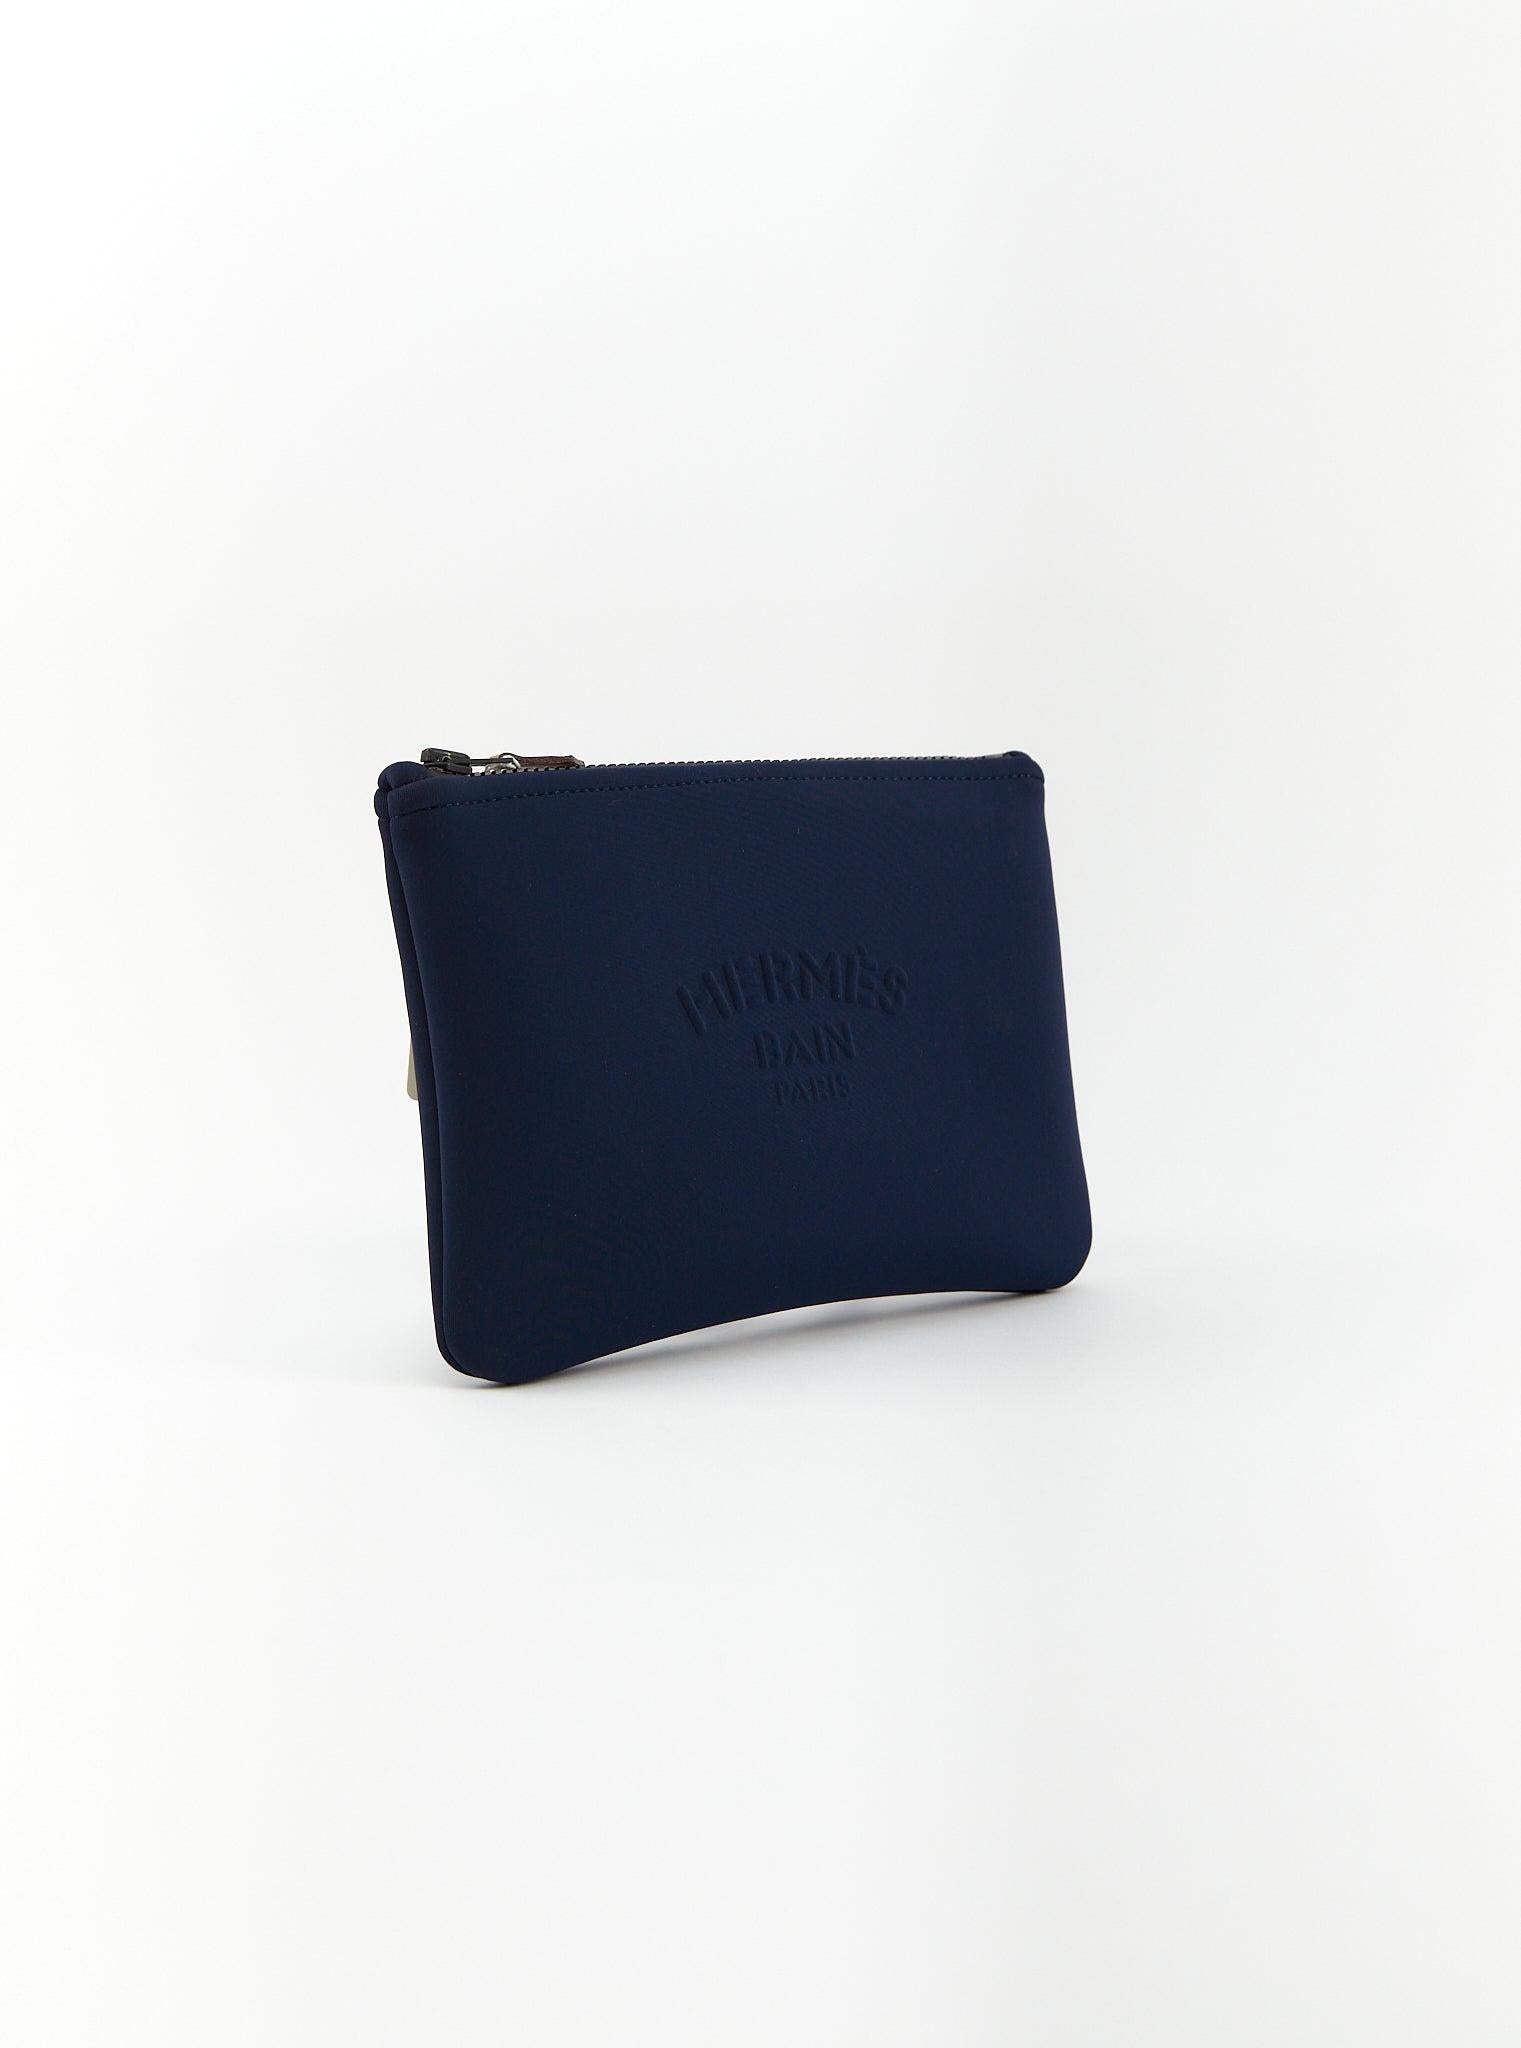 Hermès Neobain Case in Blue Marine

Flat case with water-repellent 